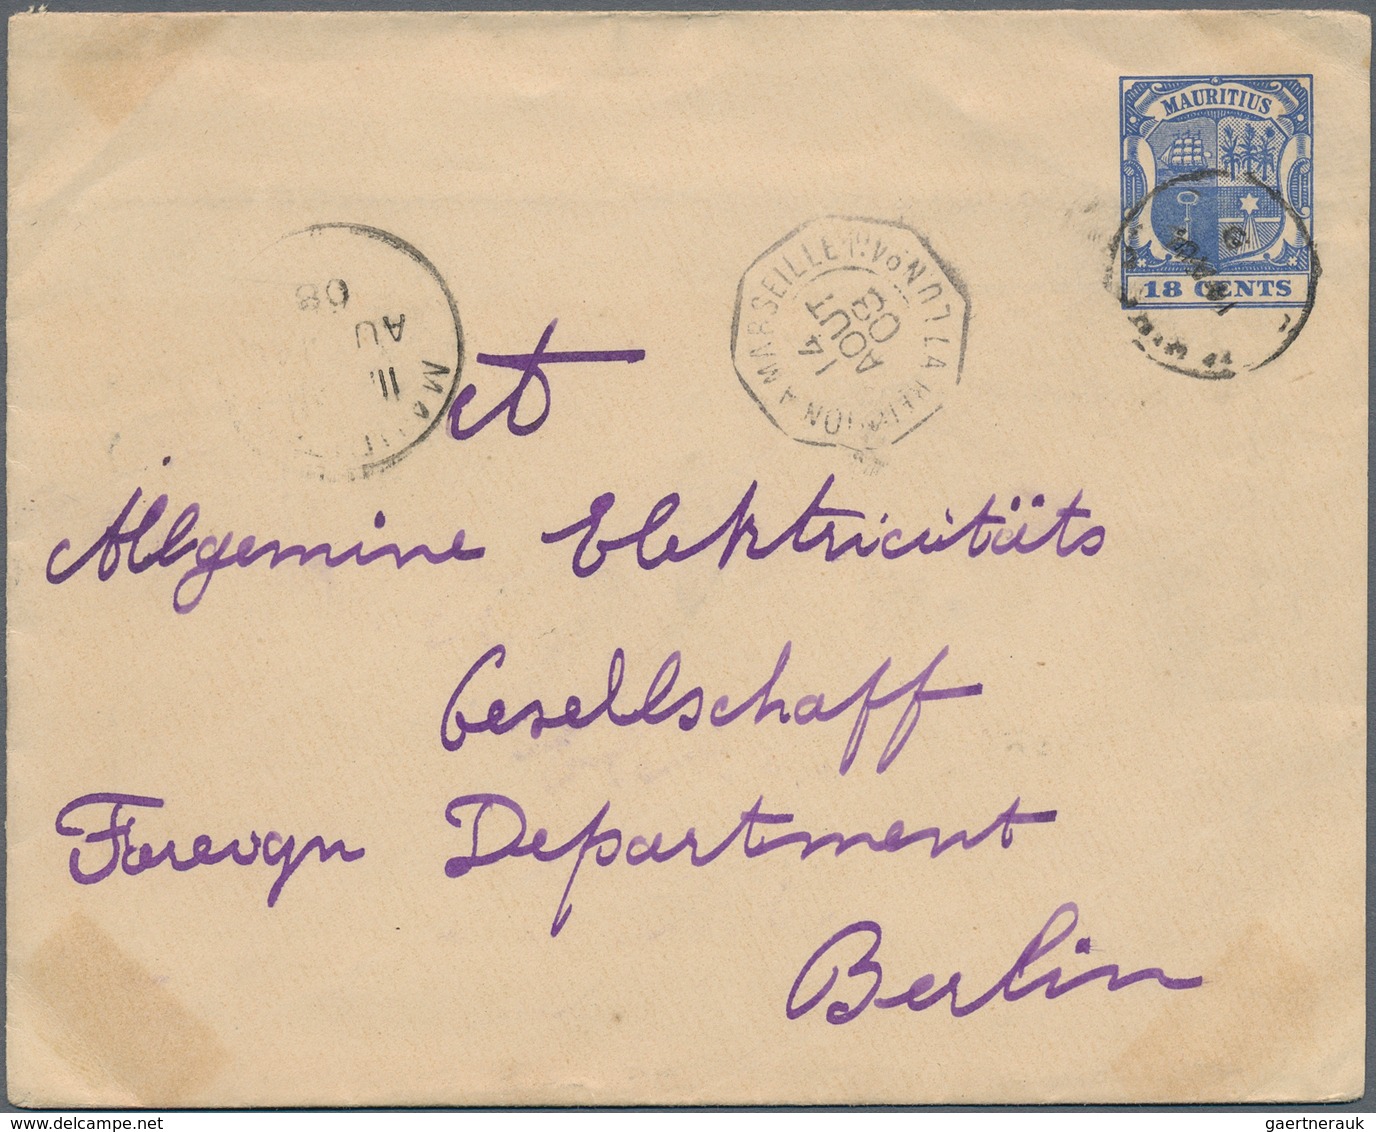 Mauritius: 1862/1908, beautiful accumulation of 35 postal stationaries: eight envelopes, five wrappe